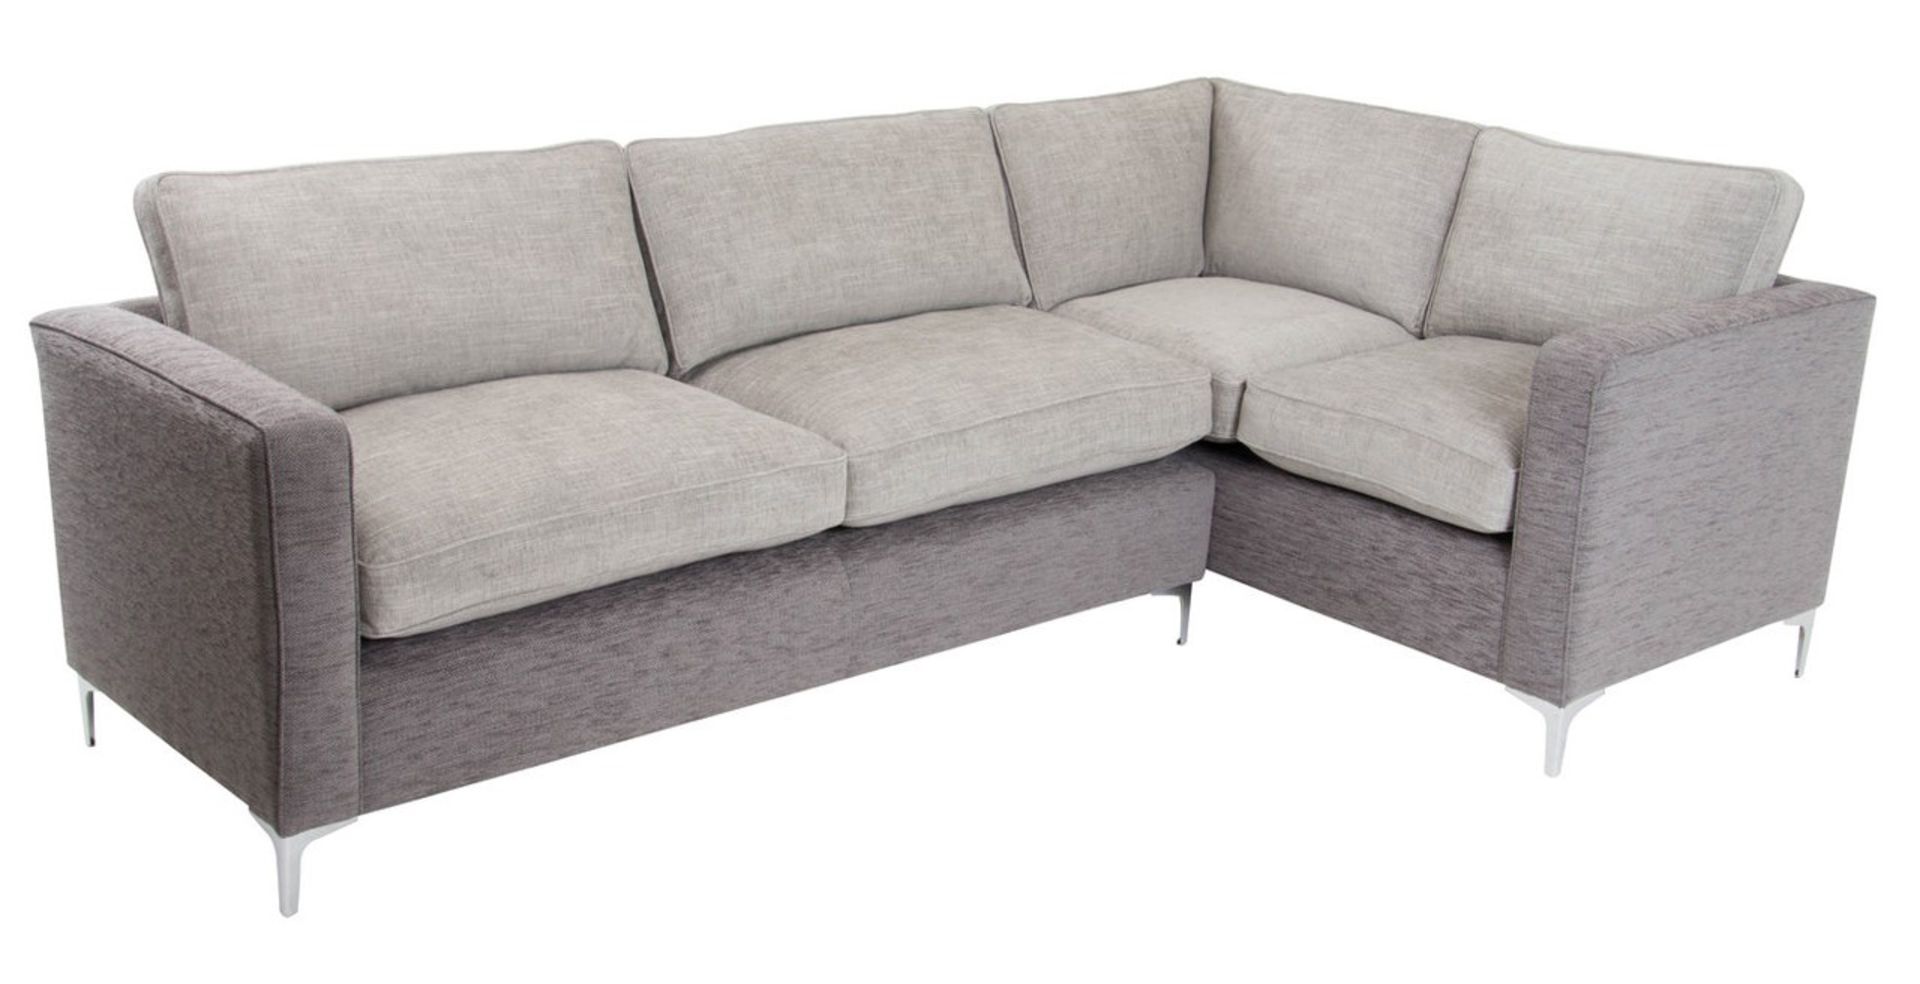 1 x Heyworth Right Hand Corner Sofa With Pewter & Cloud Fabric Upholstery - RRP £2,649! - Image 6 of 6